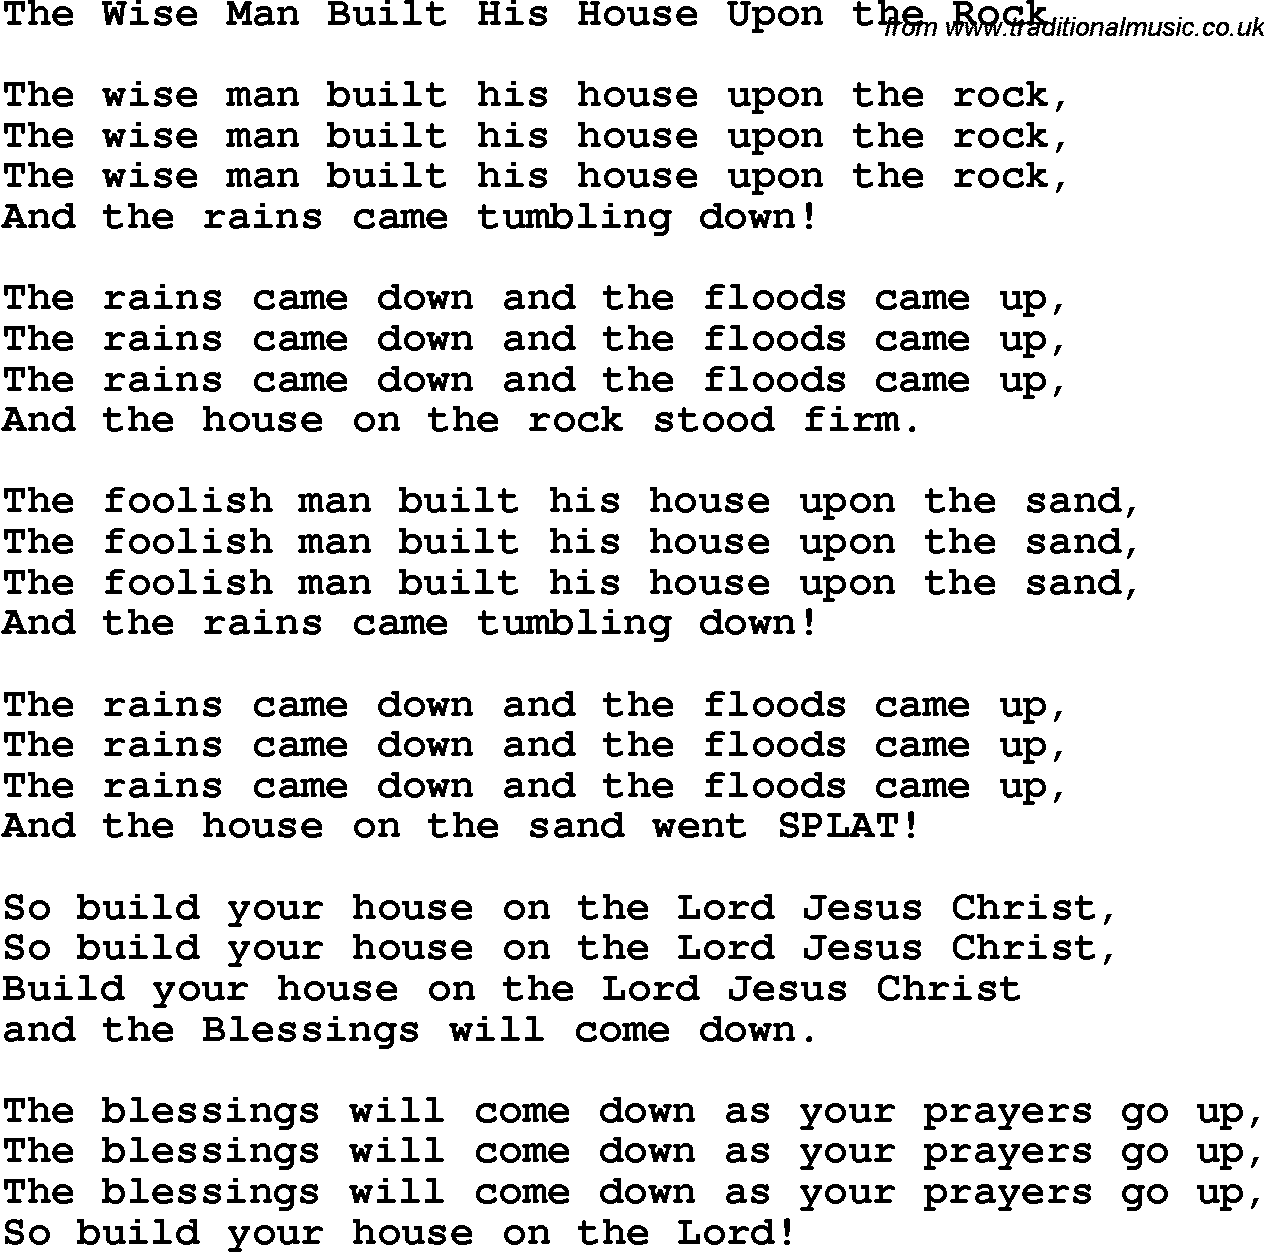 Christian Chlidrens Song The Wise Man Built His House Upon The Rock Lyrics